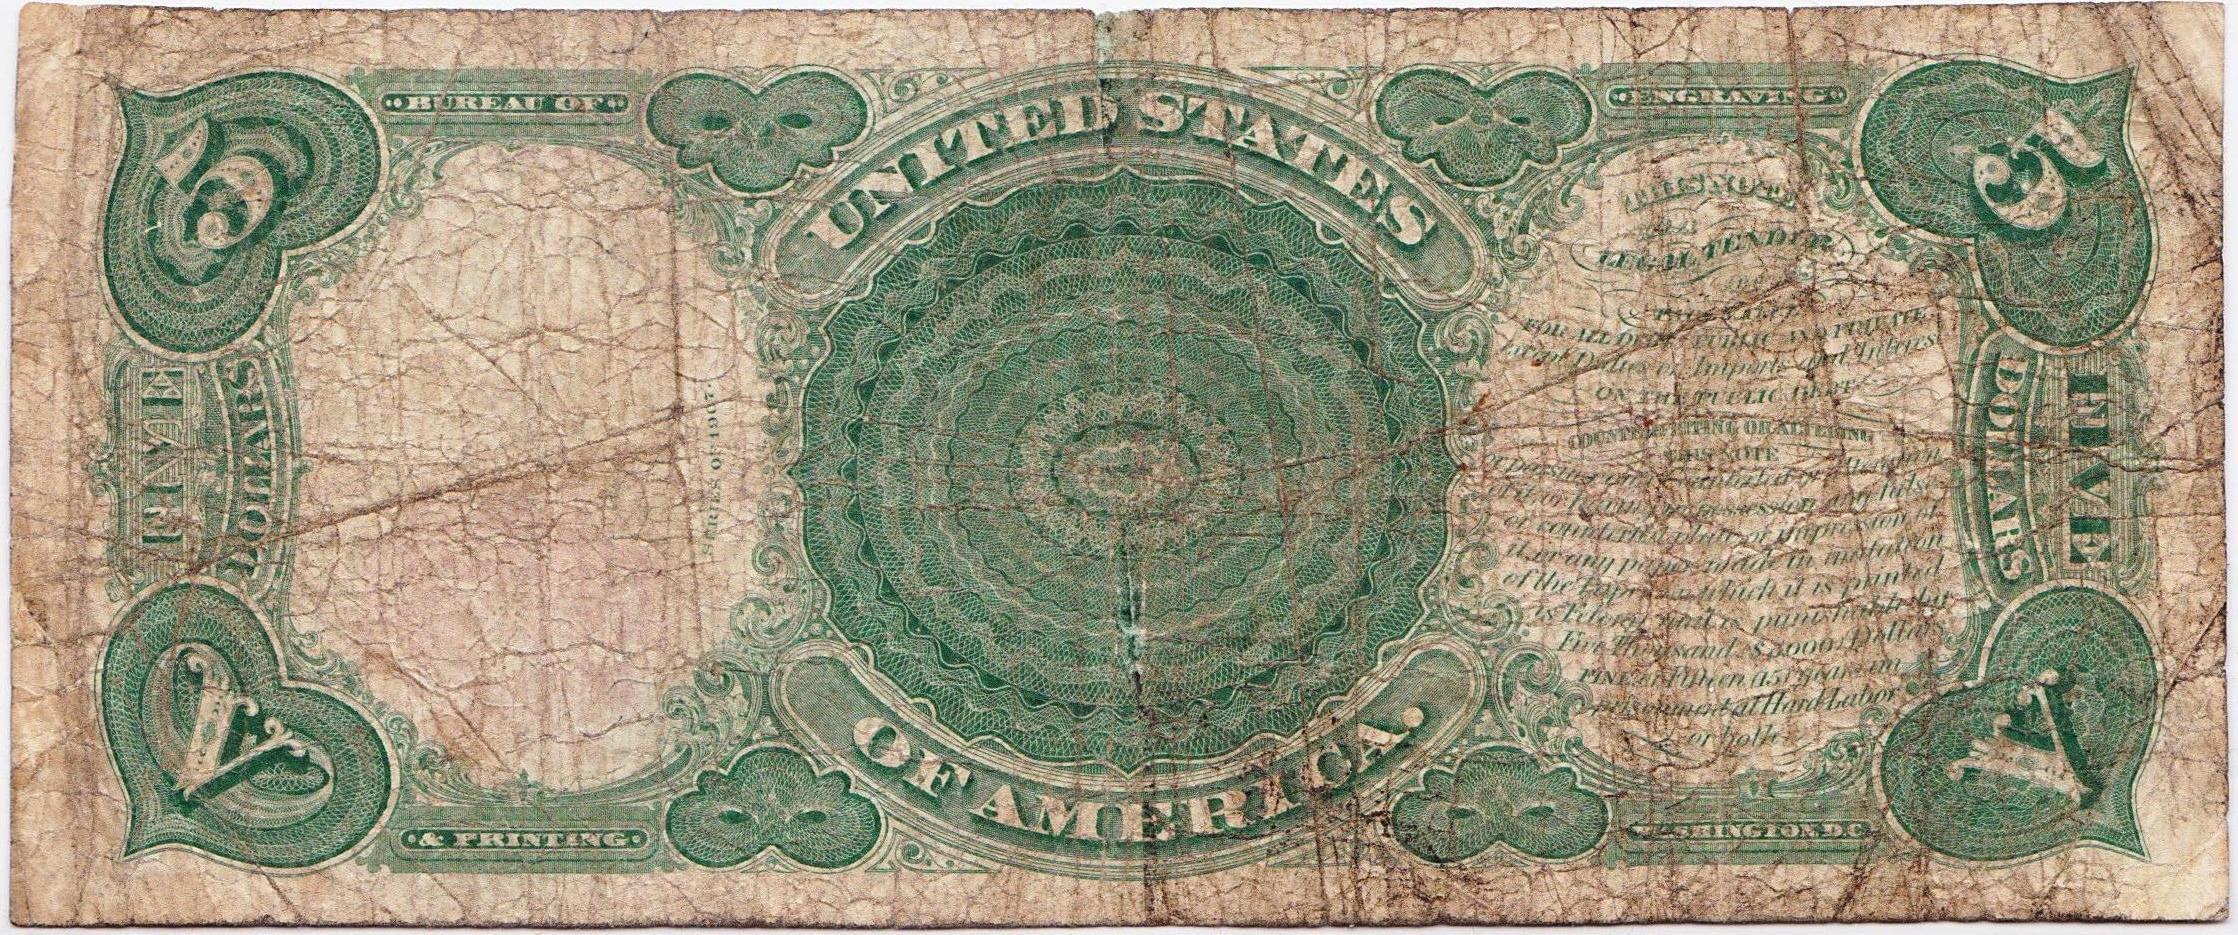 1907 U.S. large size "woodchopper" red seal legal tender banknote